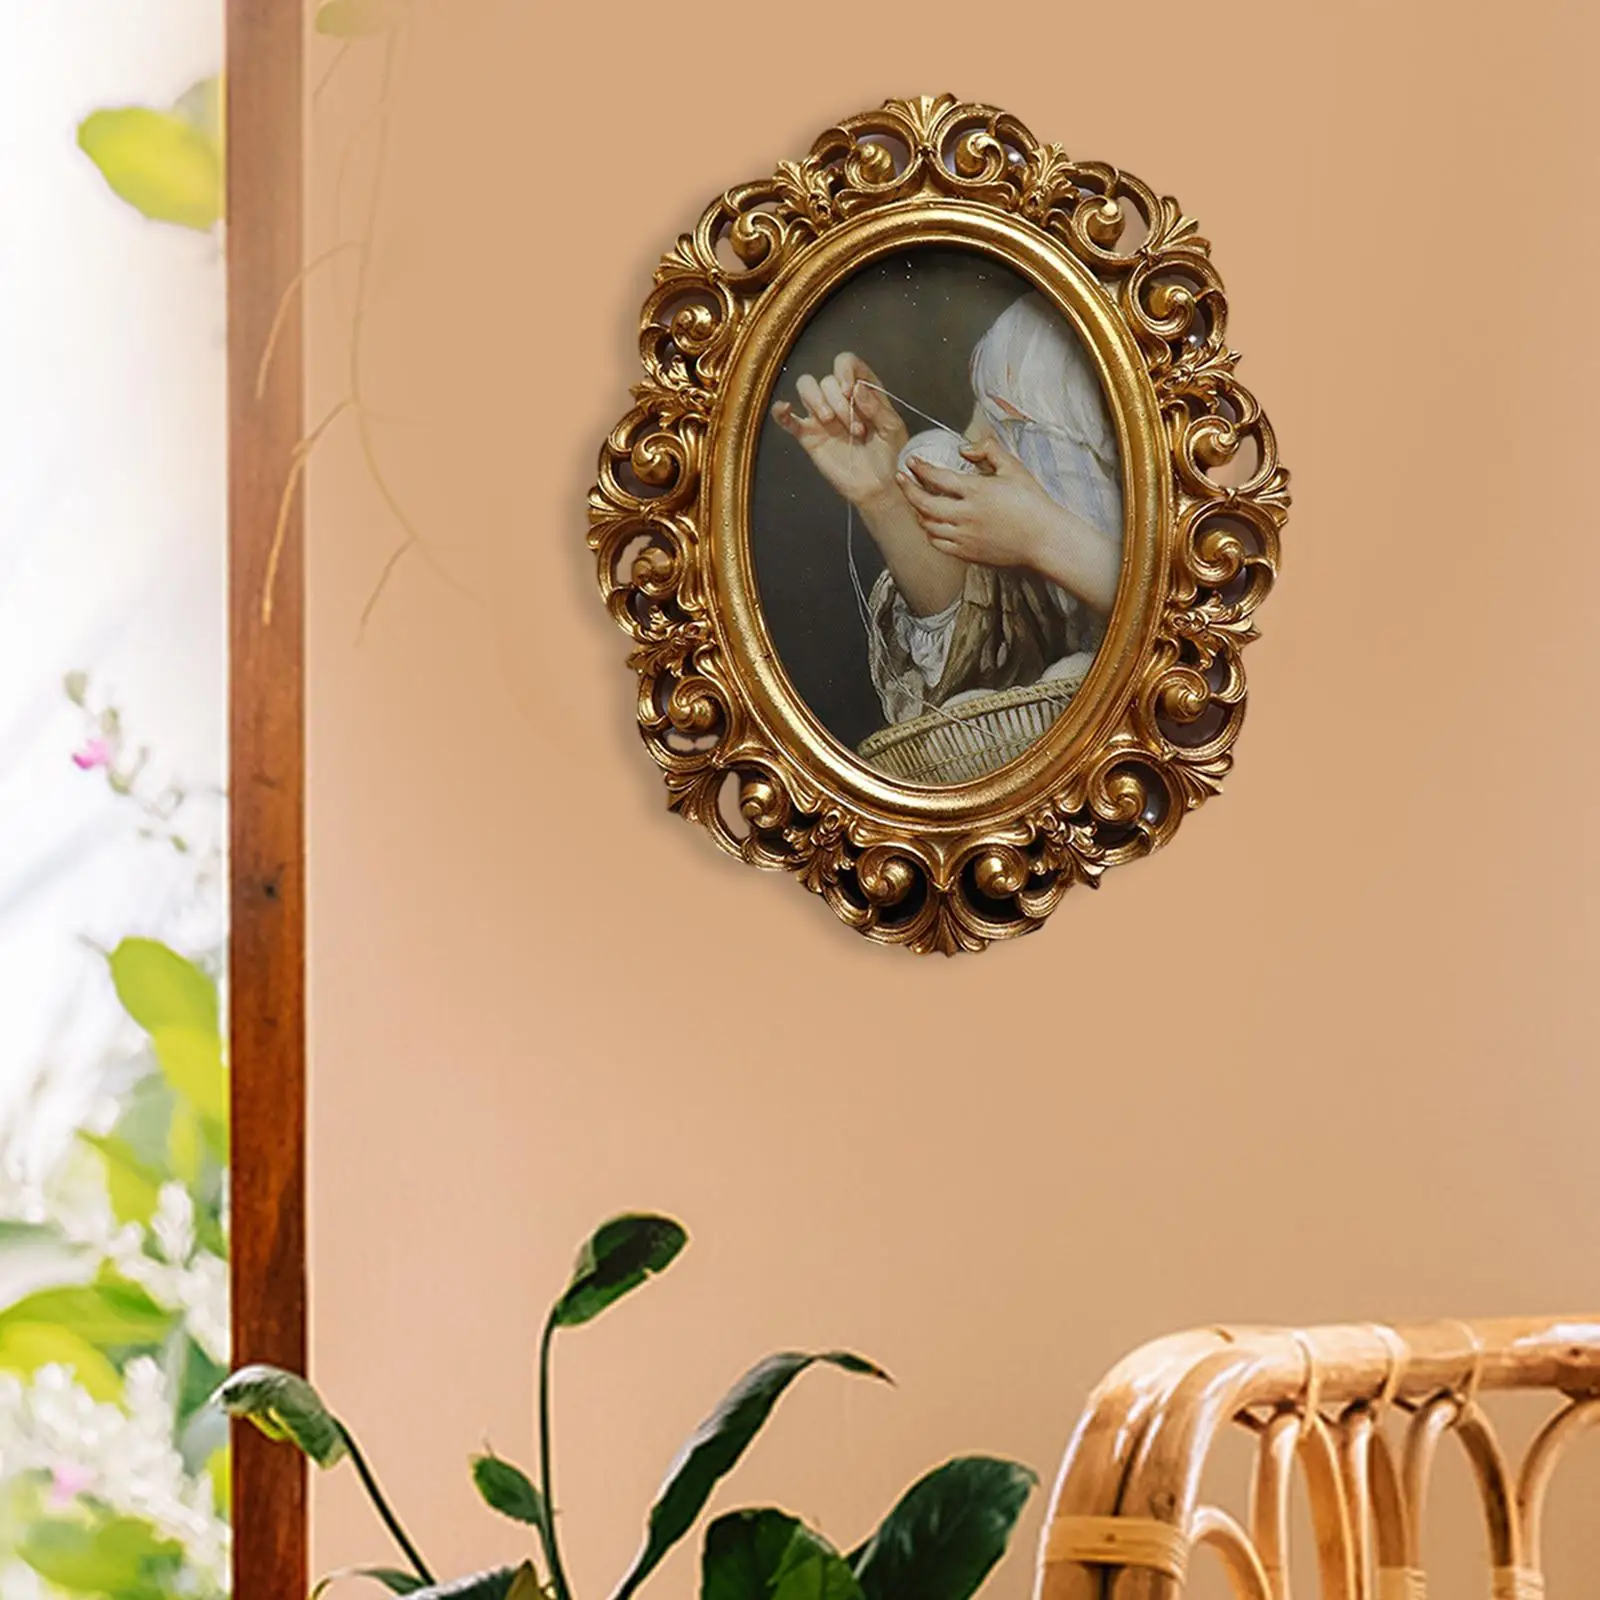 European Style Vintage Style Oval Polyresin Picture Frame Wall Mounting, Decor for Dining Room Office Photo Gallery Art Elegant